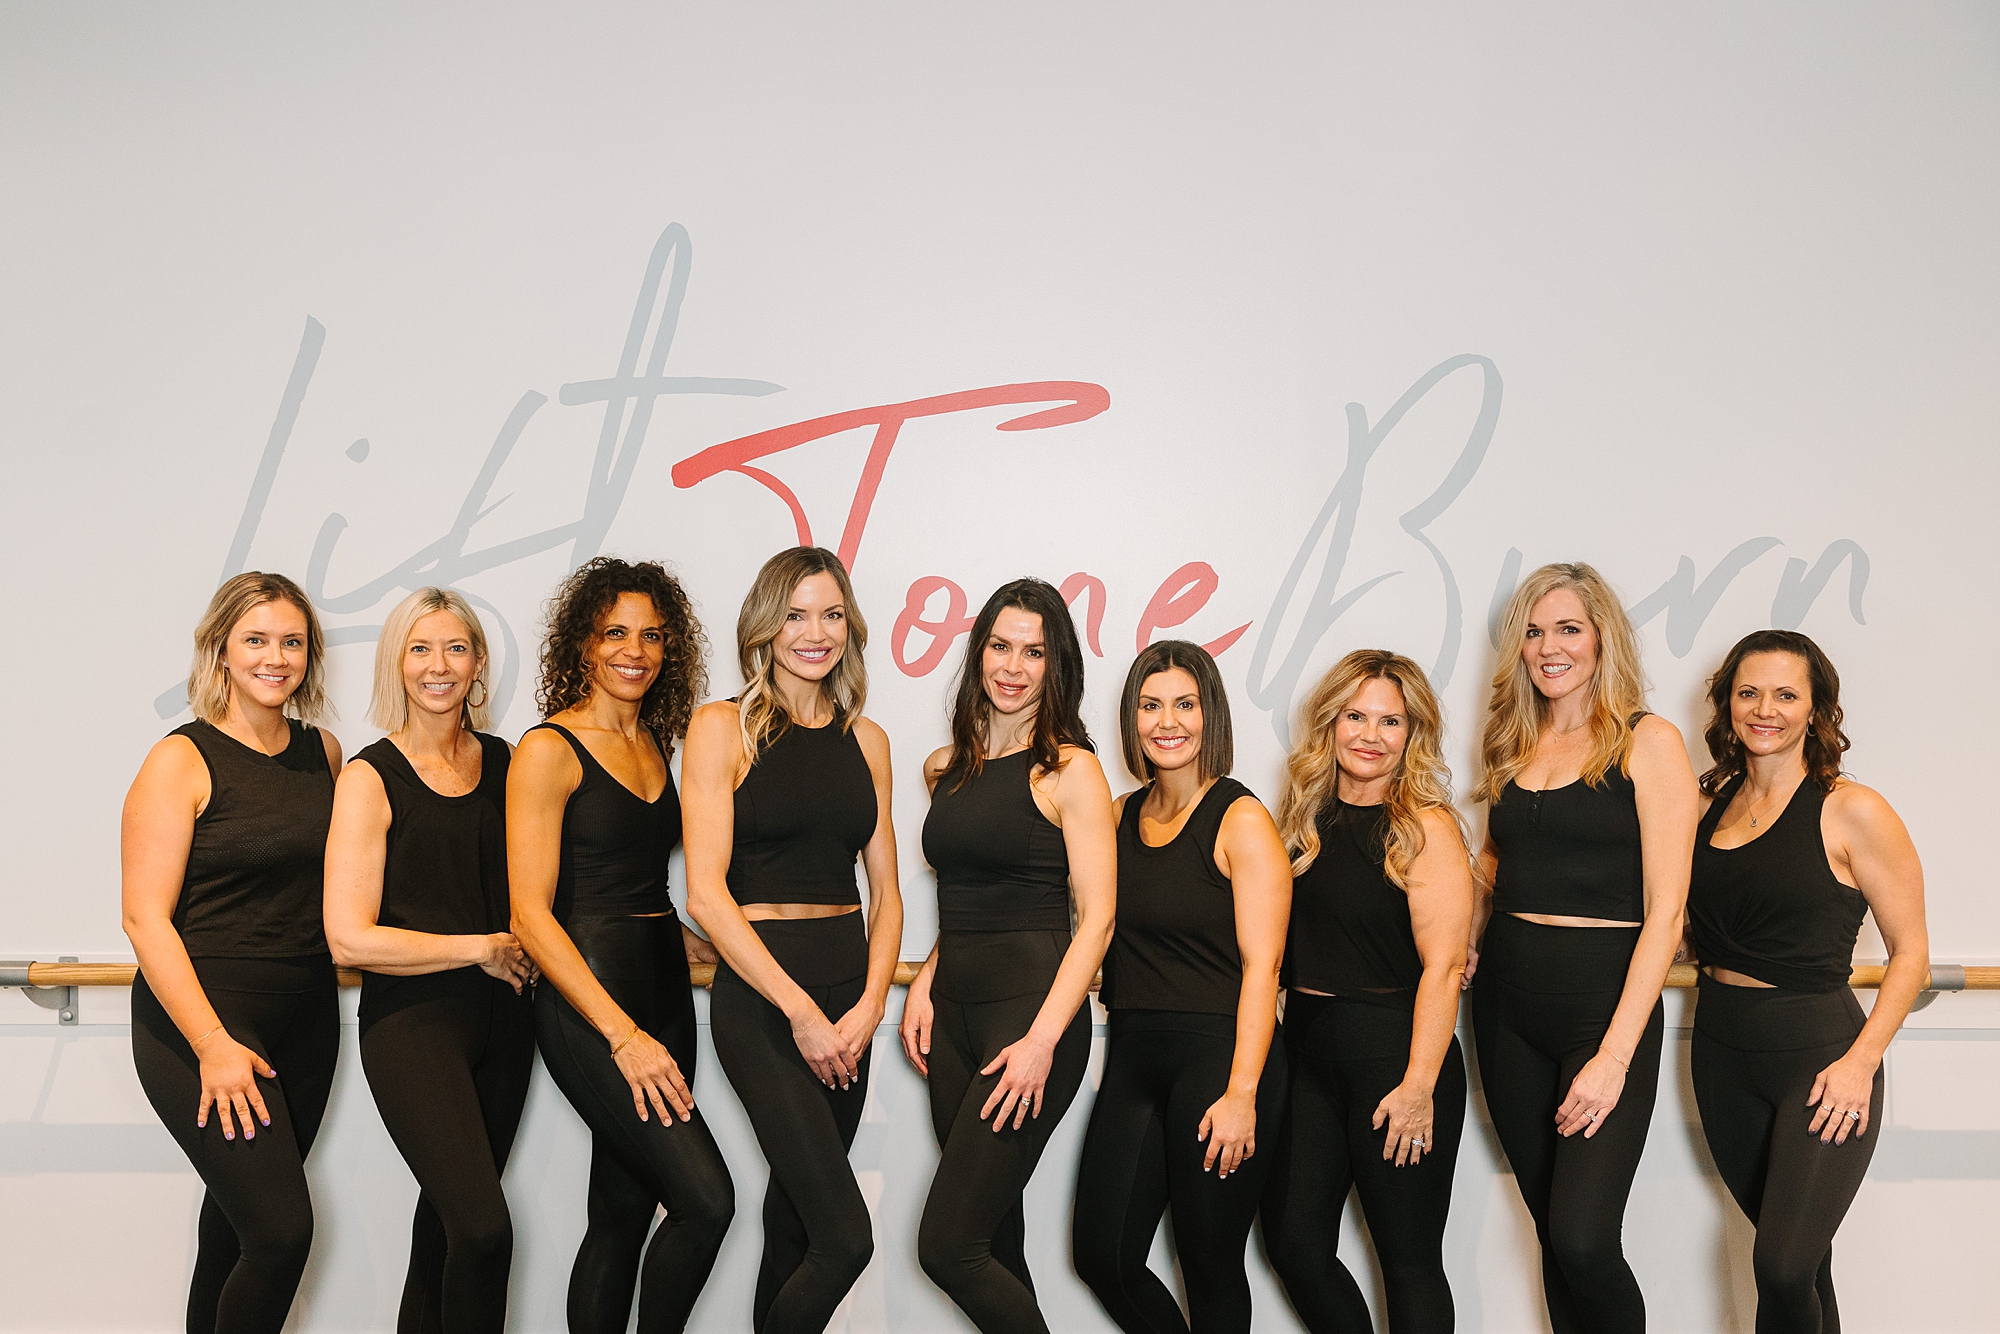 women line up by barre during fitness branding photos